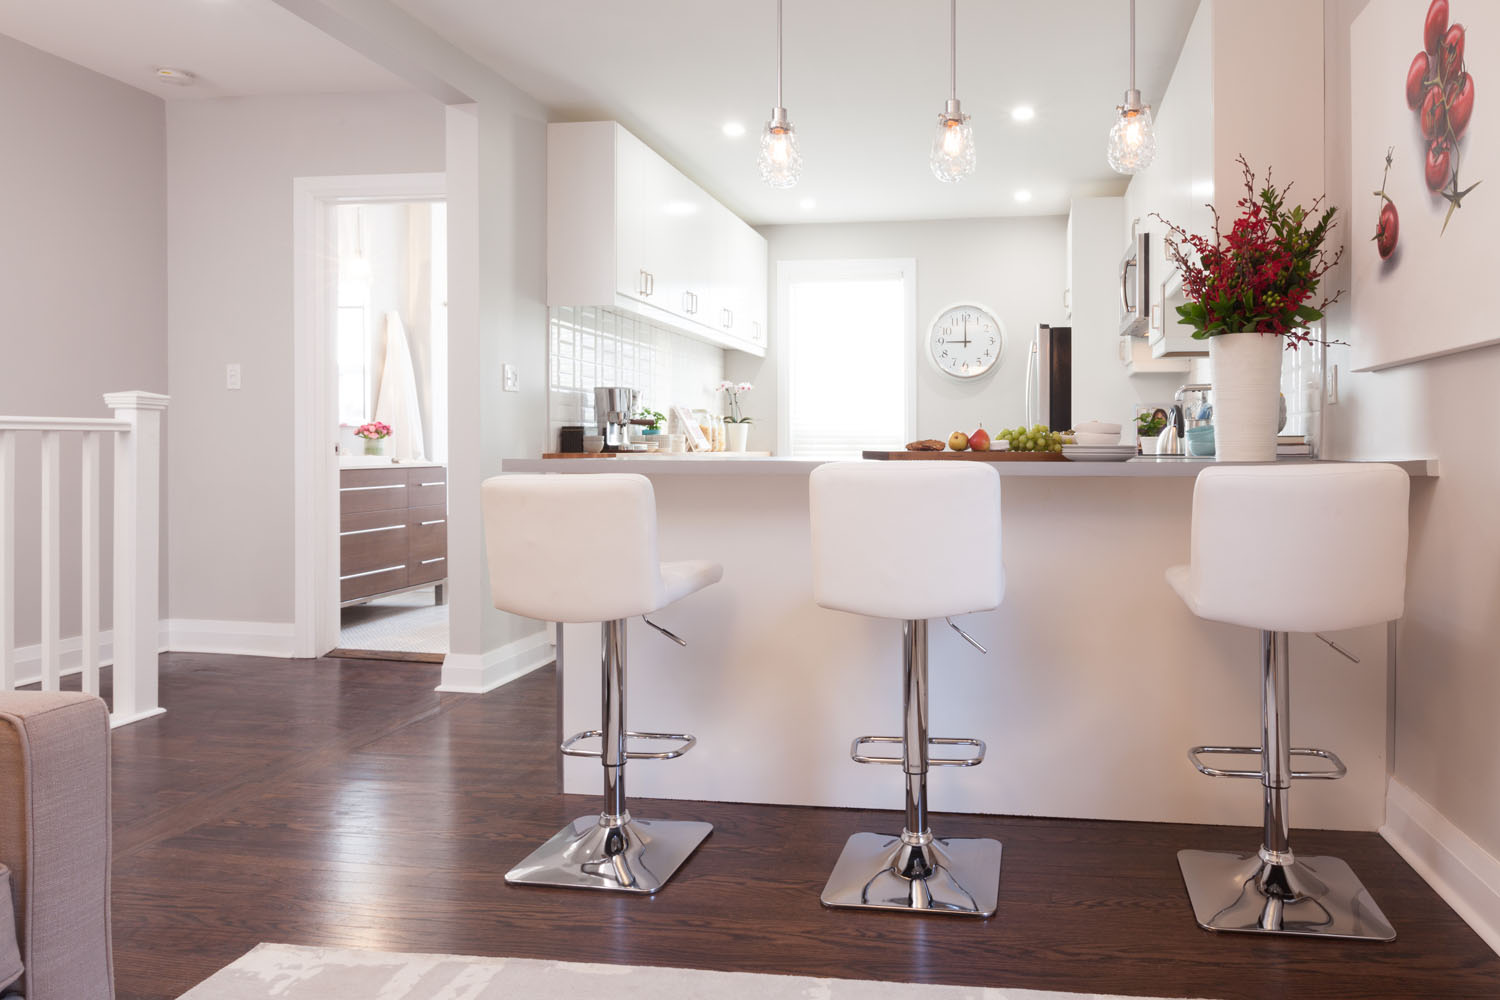 Modern kitchen counter with white bar stools